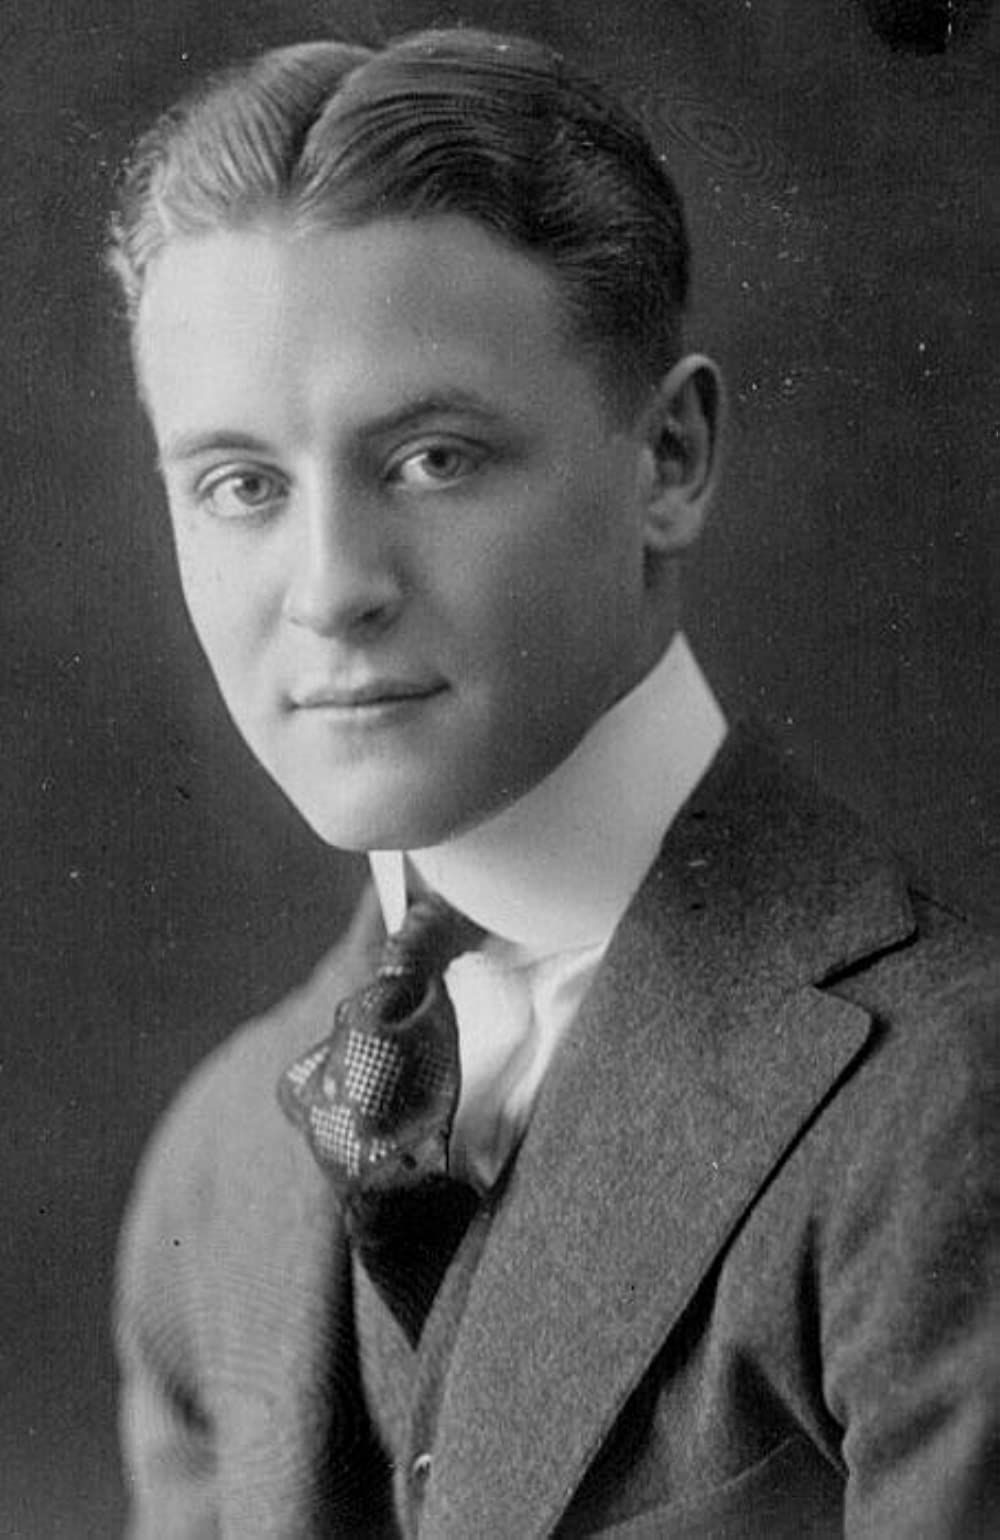 All about F. Scott Fitzgerald's early life